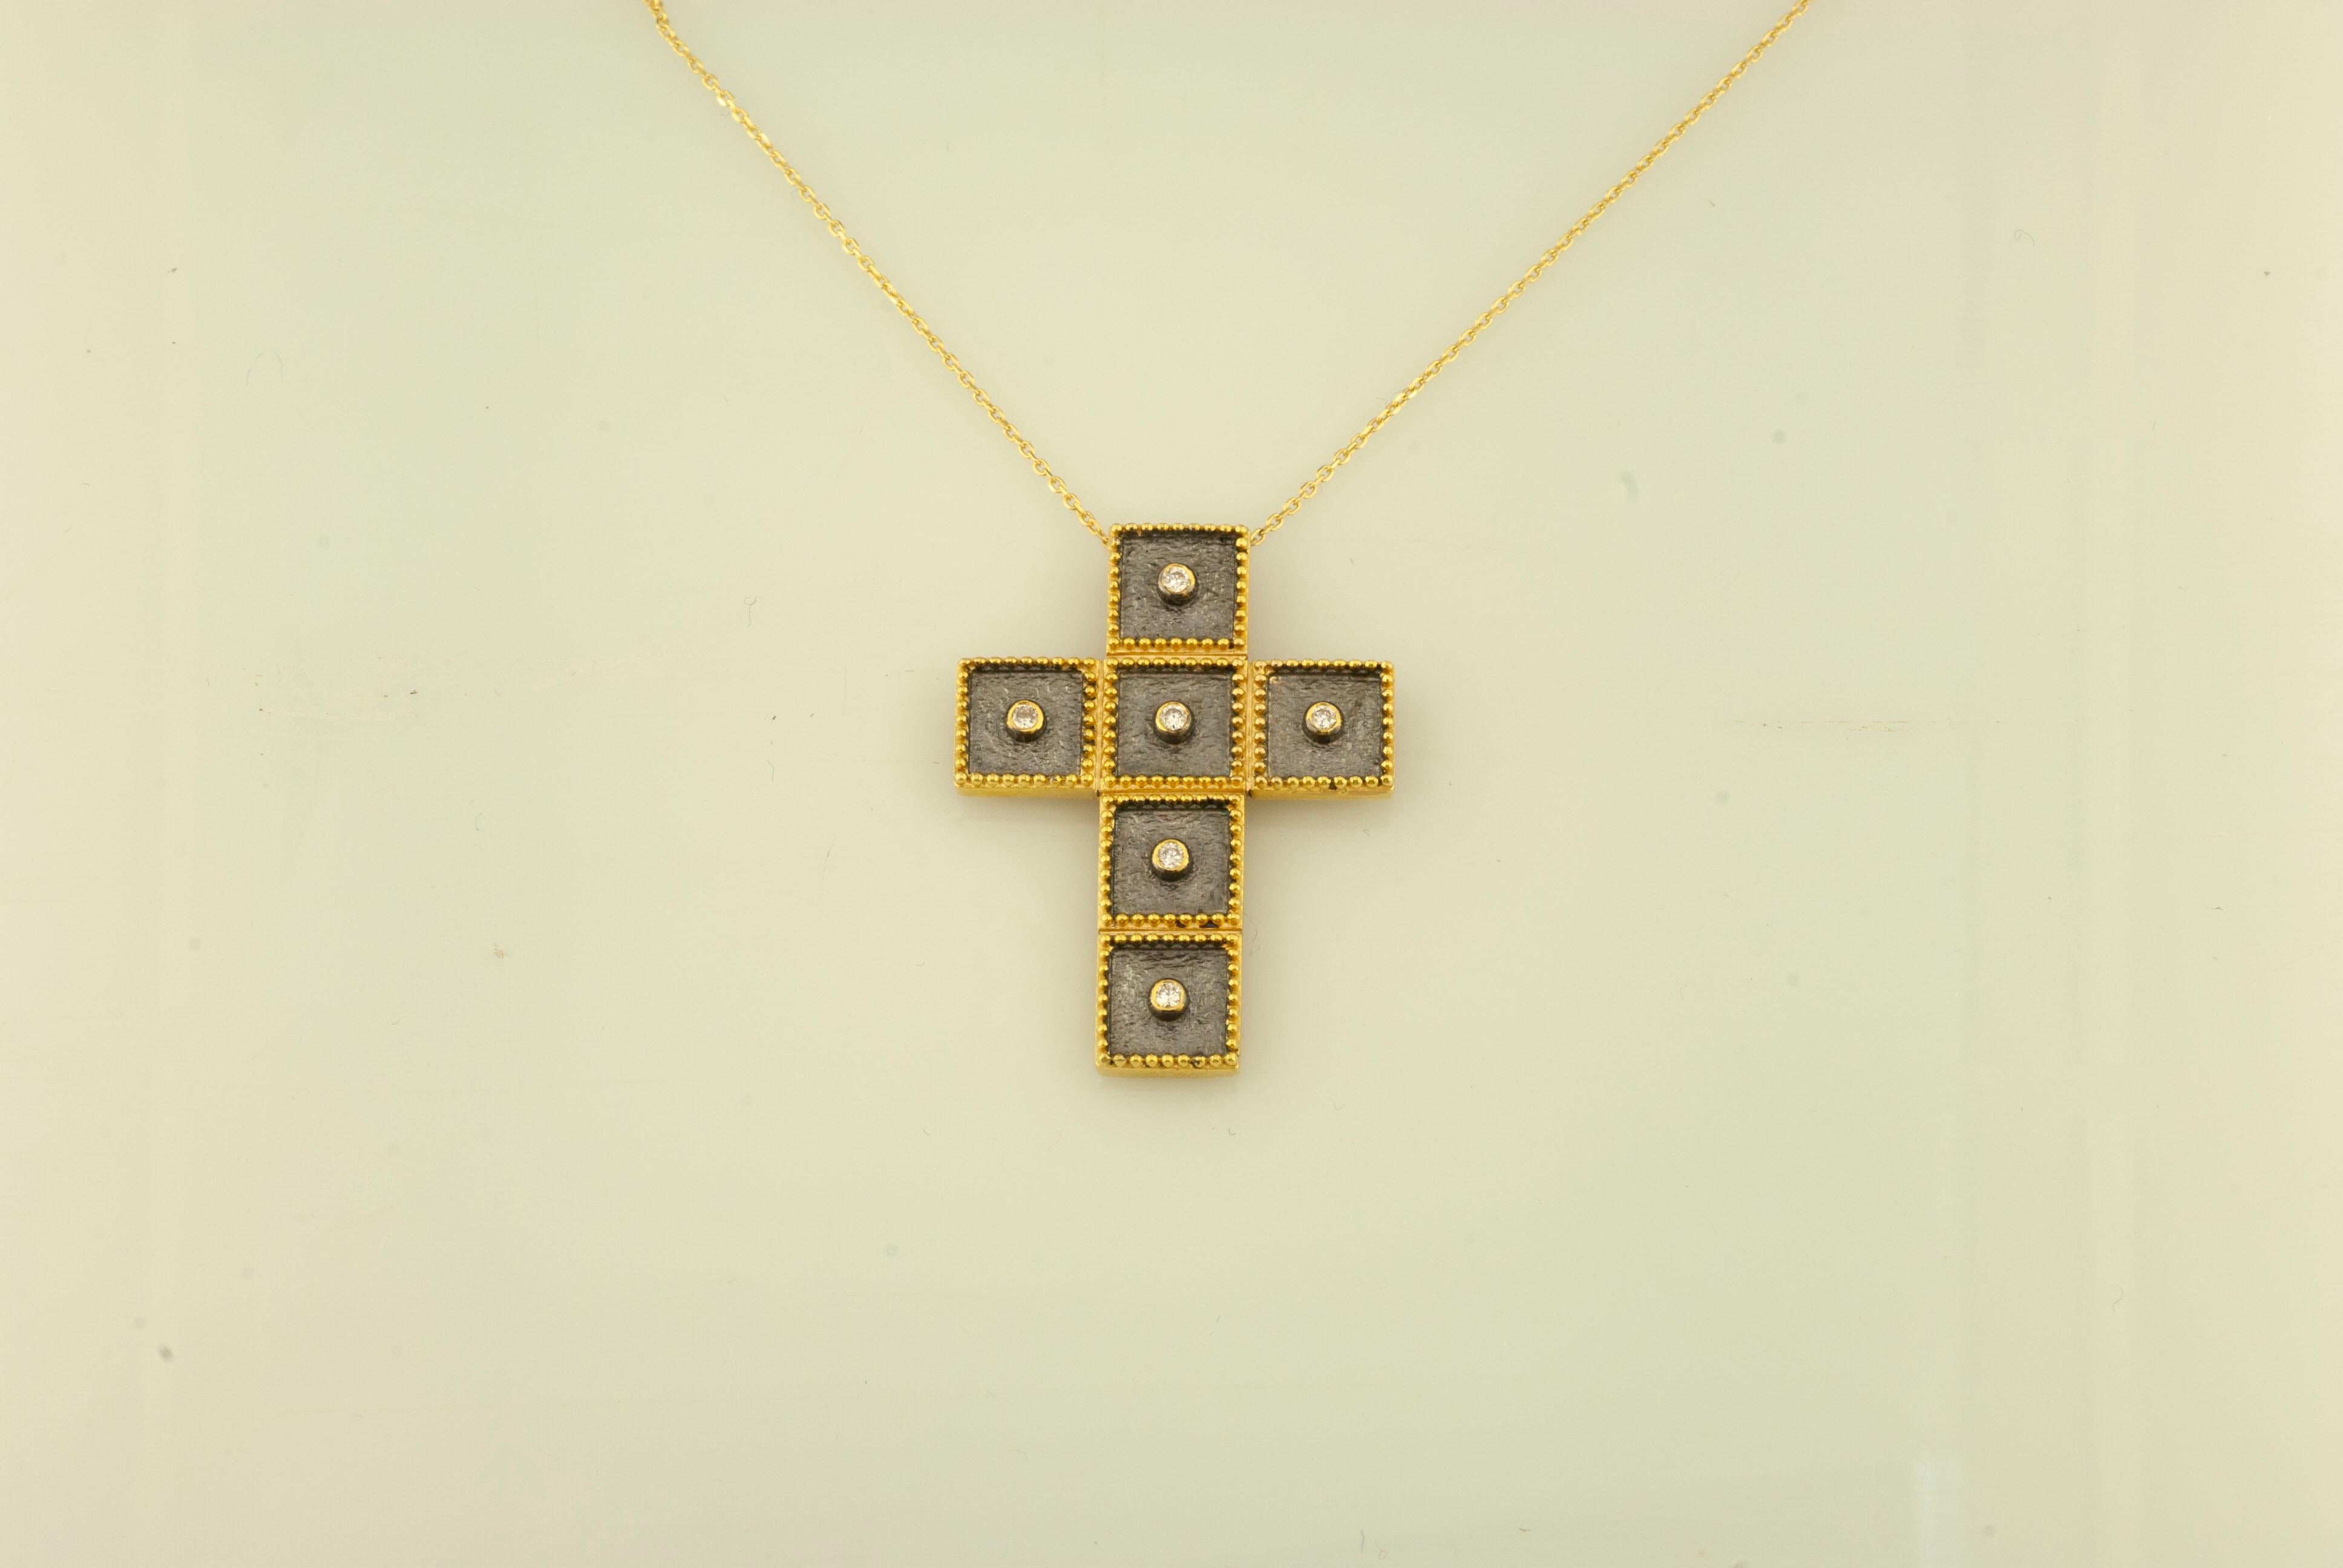 This S.Georgios designer 18 Karat yellow Gold and black Rhodium cross pendant necklace and chain are handmade with microscopically decorated Byzantine-style granulation work and a unique velvet background look. This gorgeous cross is finished with